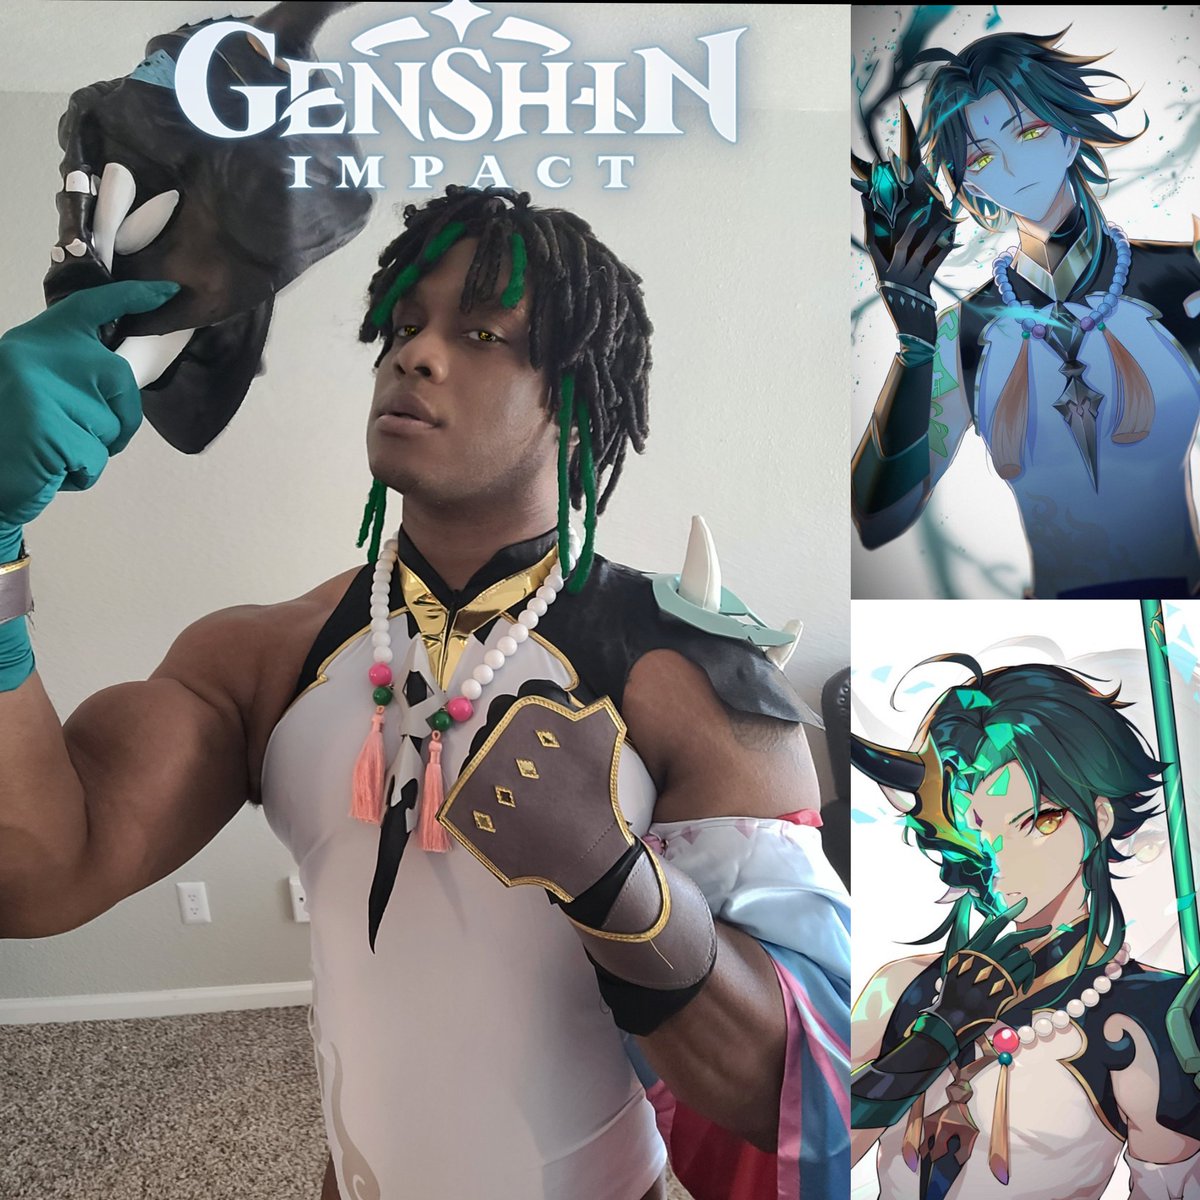 Finally jumped on the Genshin Impact train with this Xiao cosplay!
#newcosplay #cosplaytransition #genshinimpact #genshinimpactcosplay #xiao #xiaocosplay #xiaogenshinimpact #blerdandpowerful #blerd #blackcosplayer #trend #fyp #supportblackcosplayers